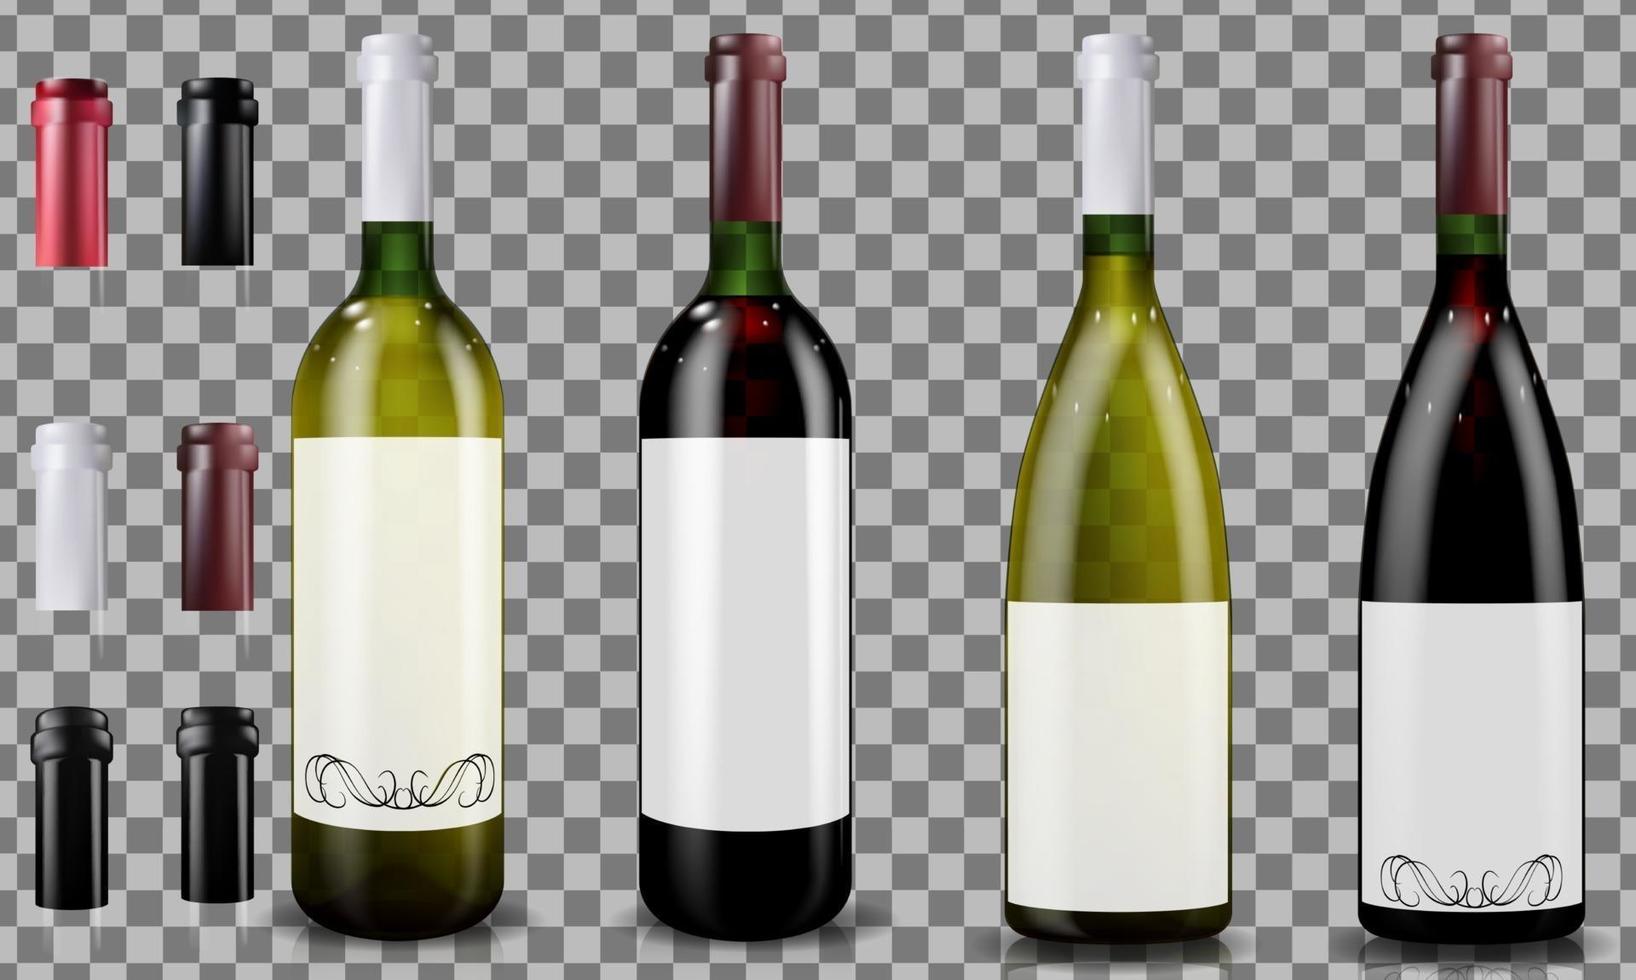 Red and white wine bottles. Caps or sleeves, closing the stopper. vector